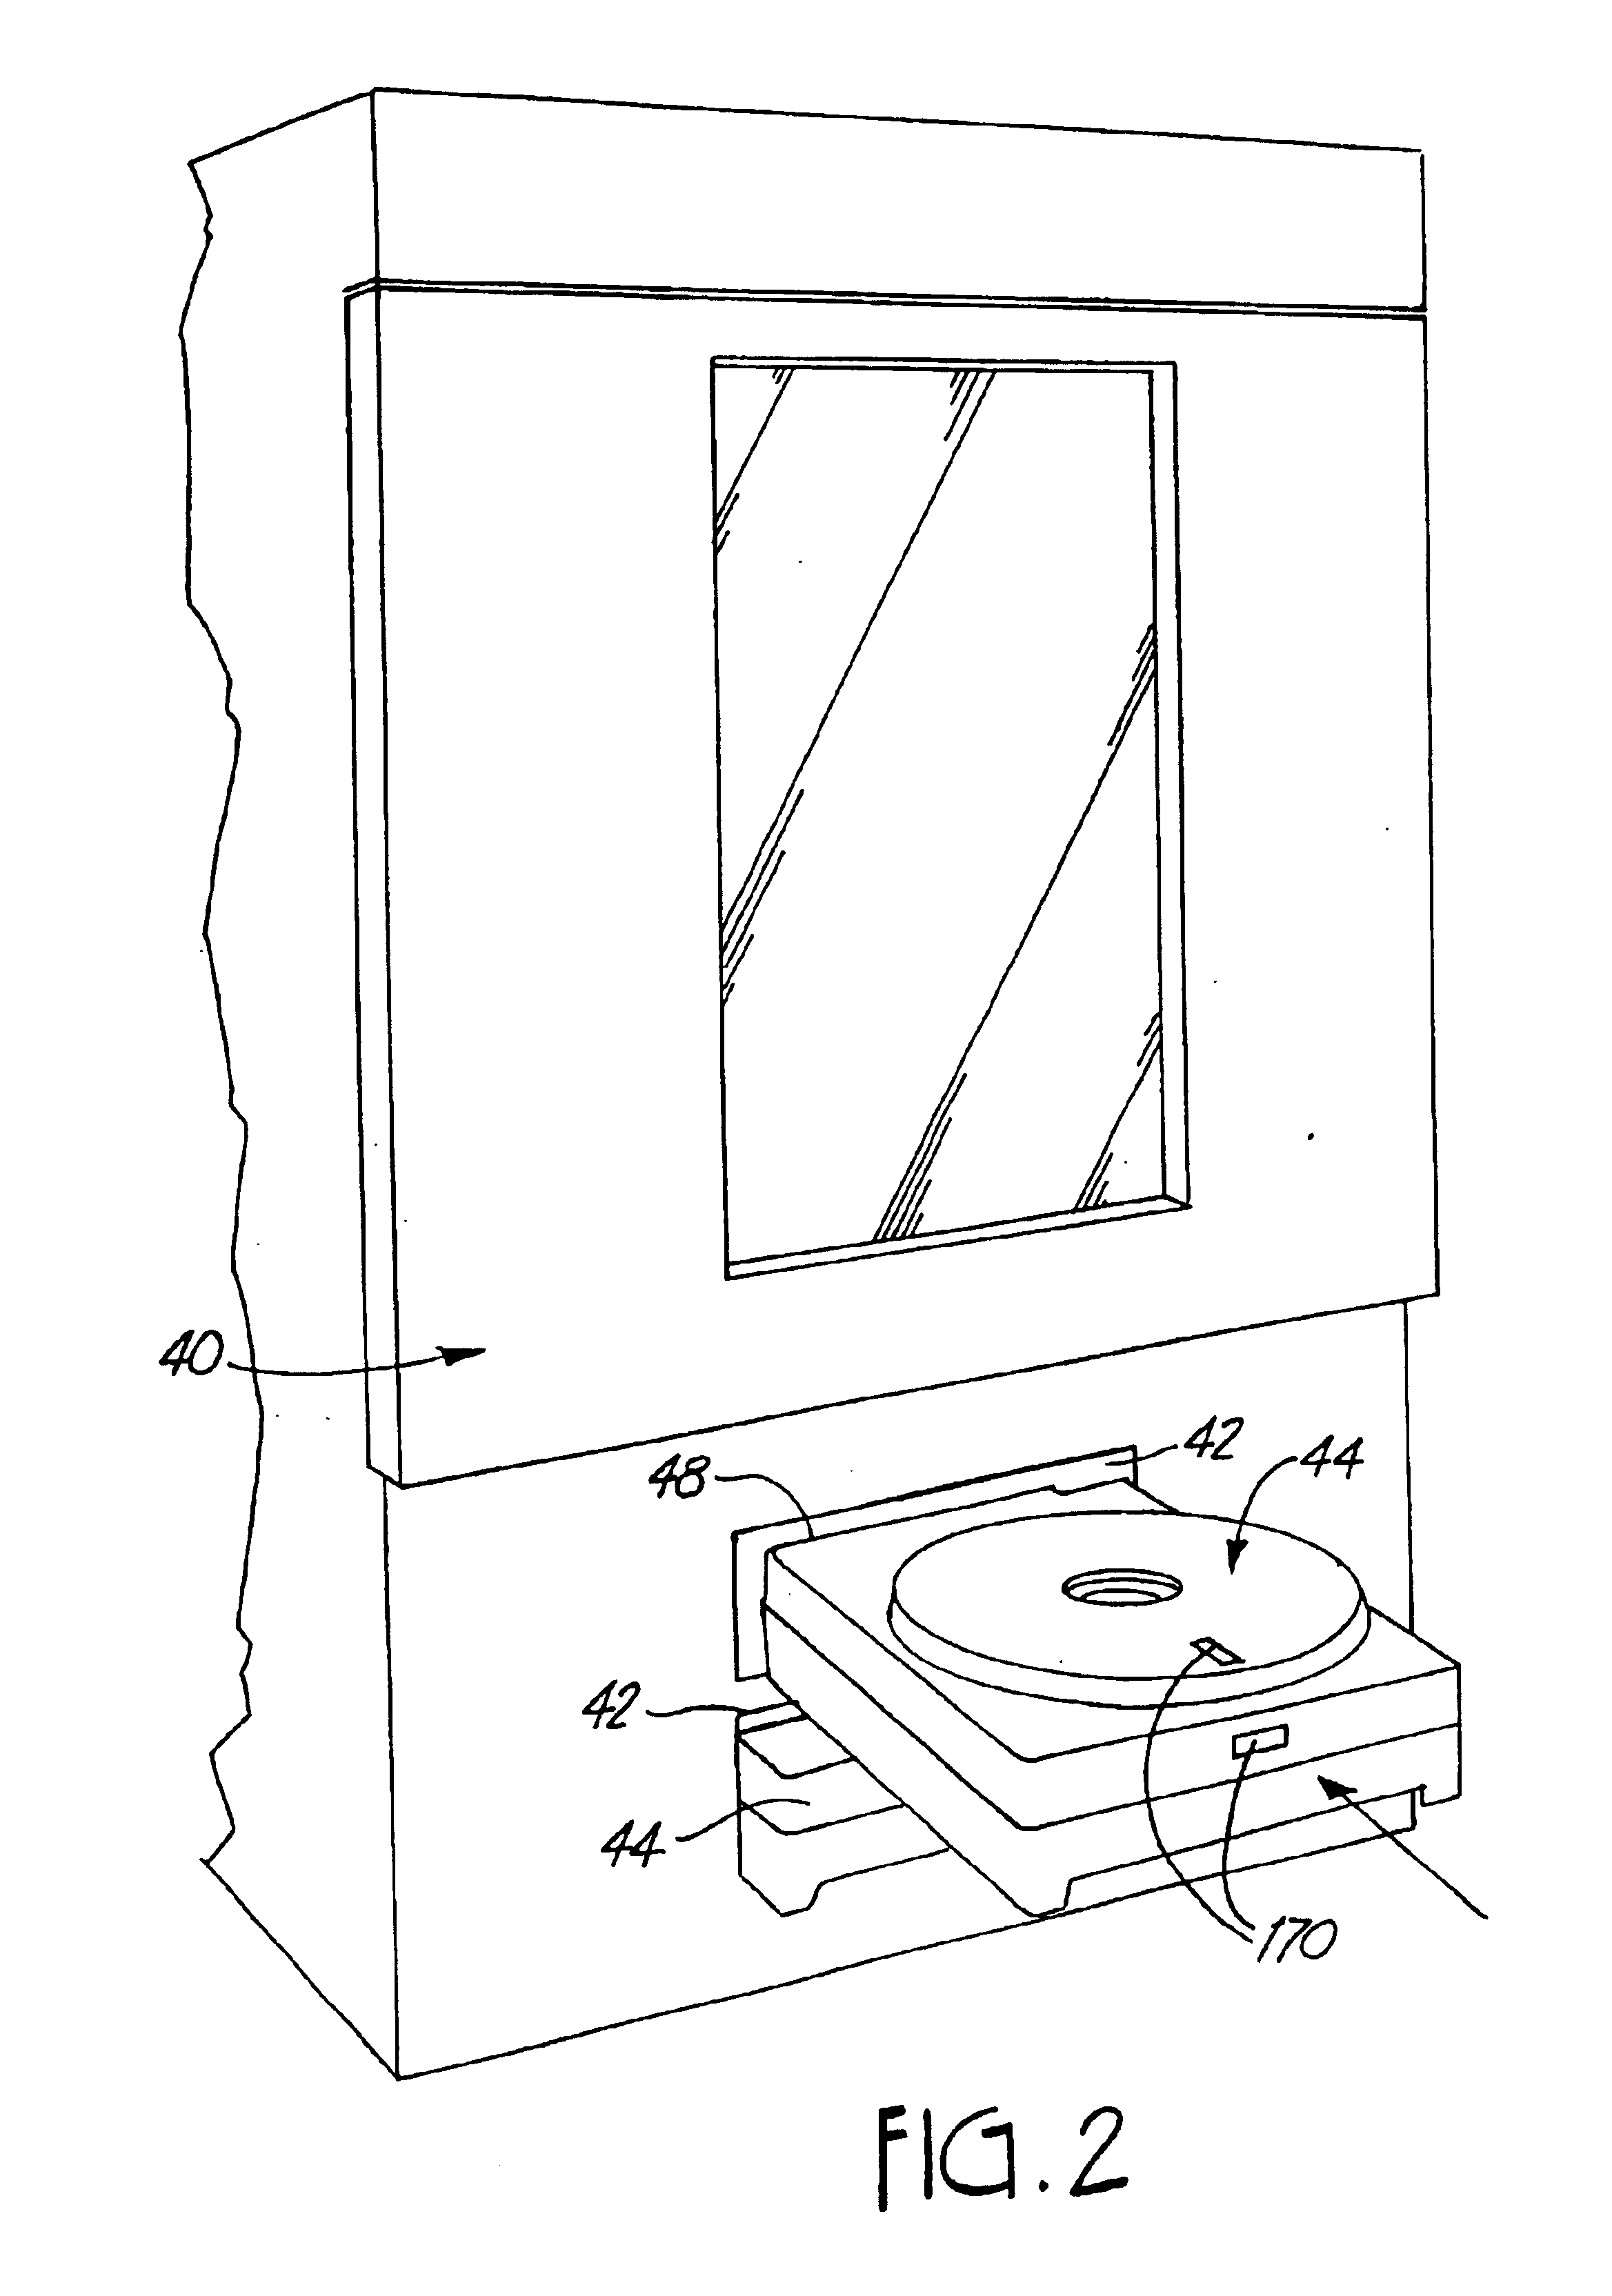 Filament loading system in an extrusion apparatus